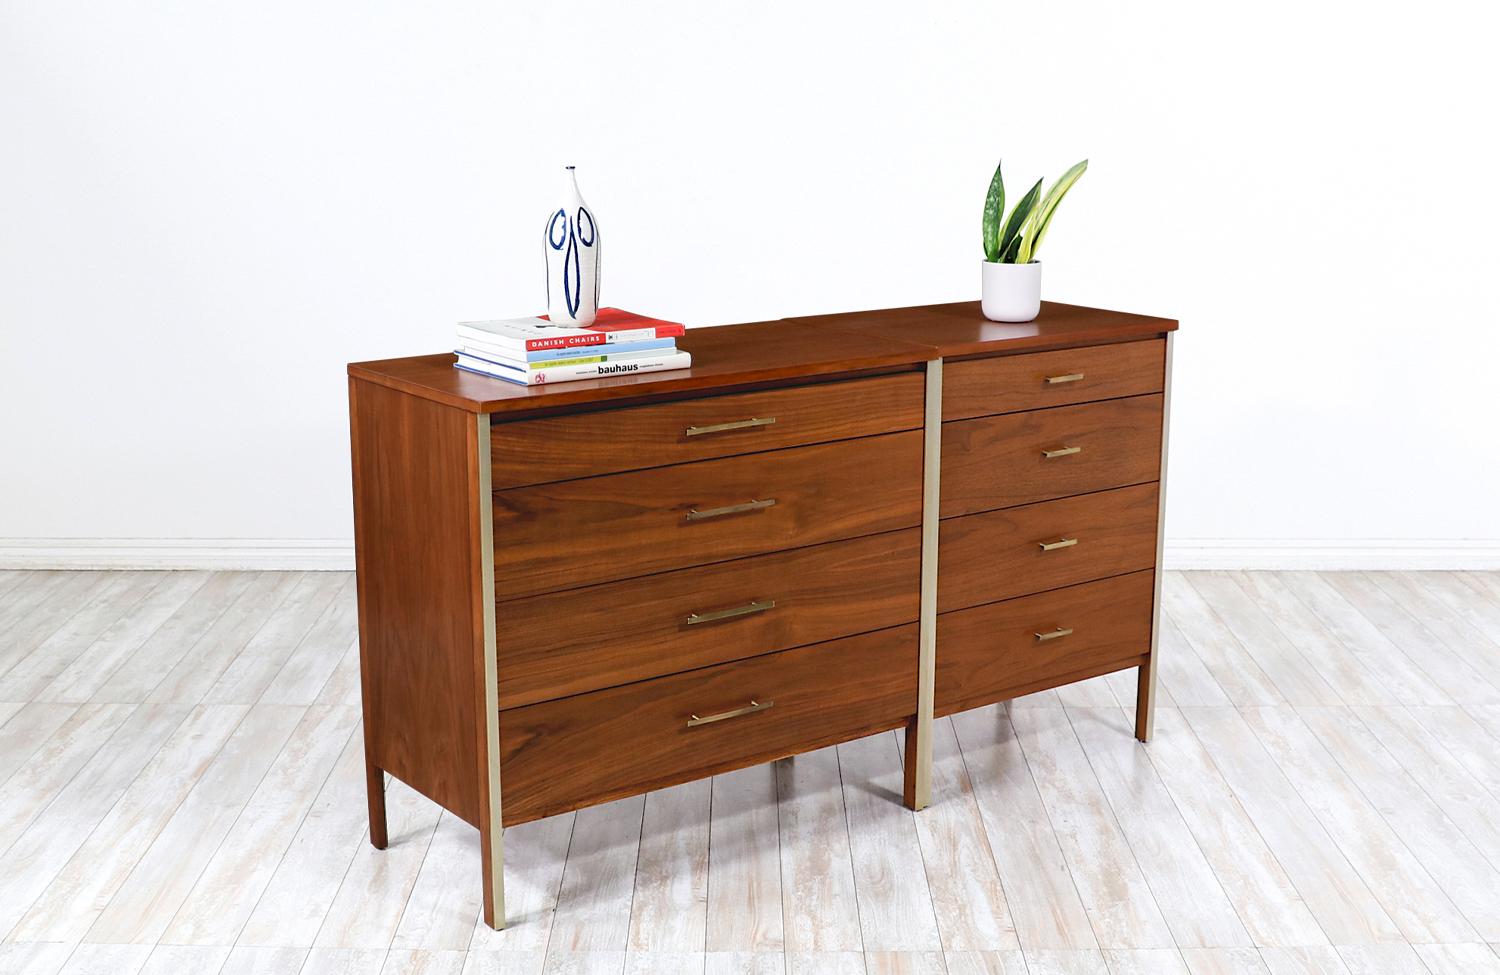 Mid-20th Century Mid-Century Modern Dresser Set with Vanity by Paul McCobb for Calvin Furniture